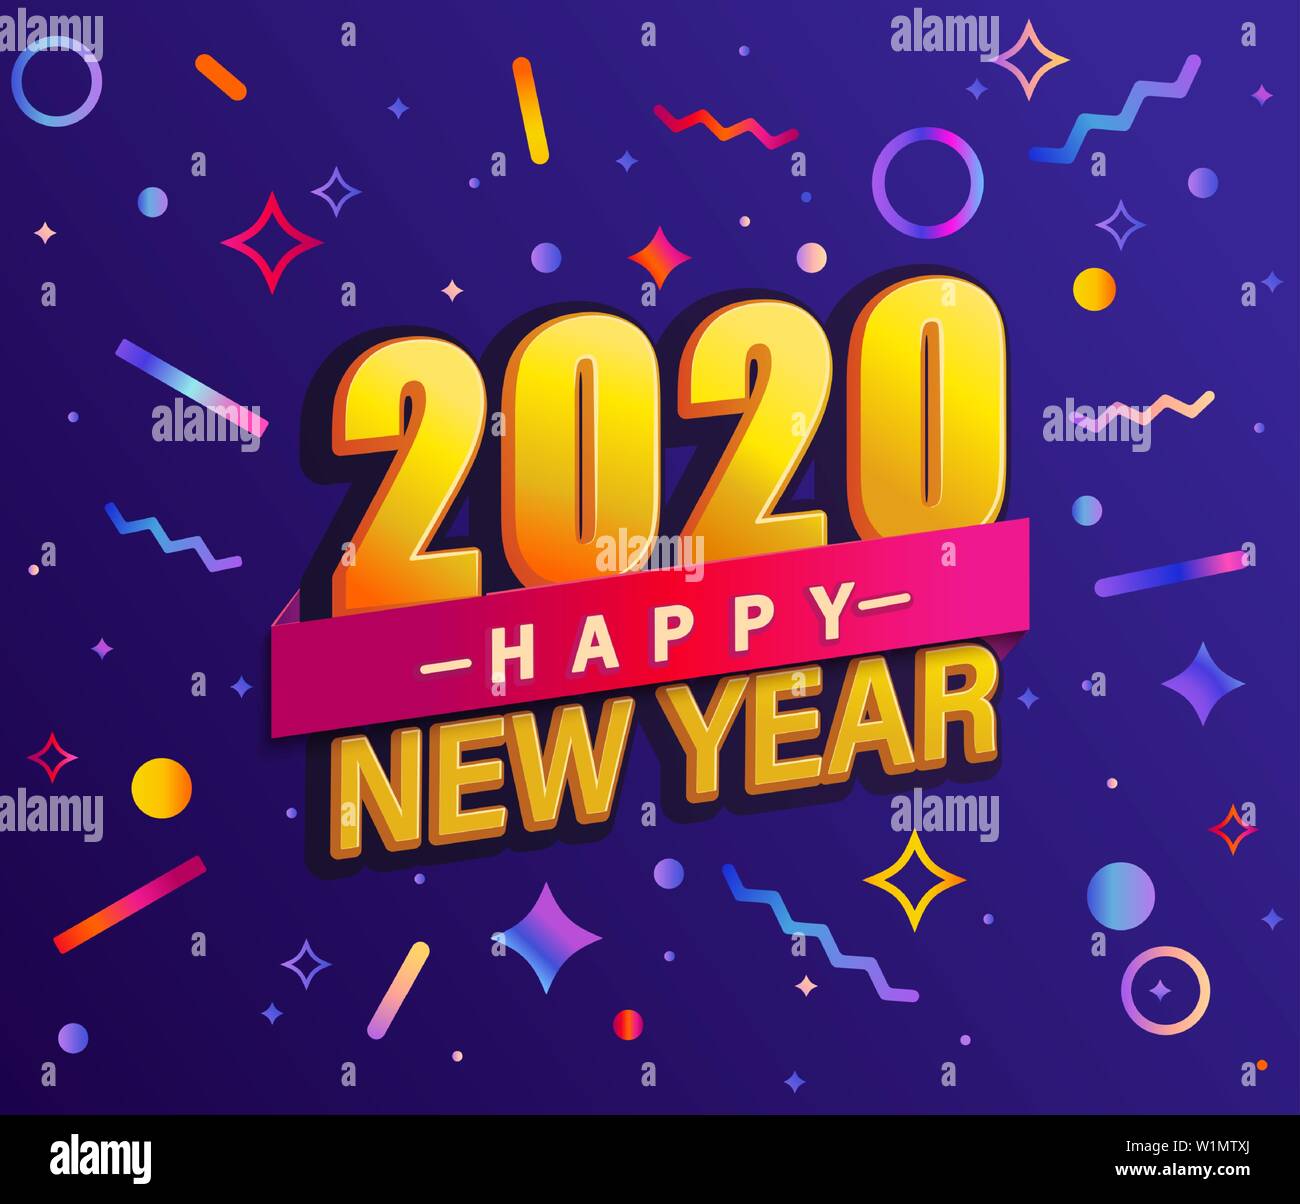 Banner For New Year Modern Design Card Poster With Geometric Shapes And Wishing Happy Holiday Great For Flyers Greetings Invitations Congrat Stock Vector Image Art Alamy